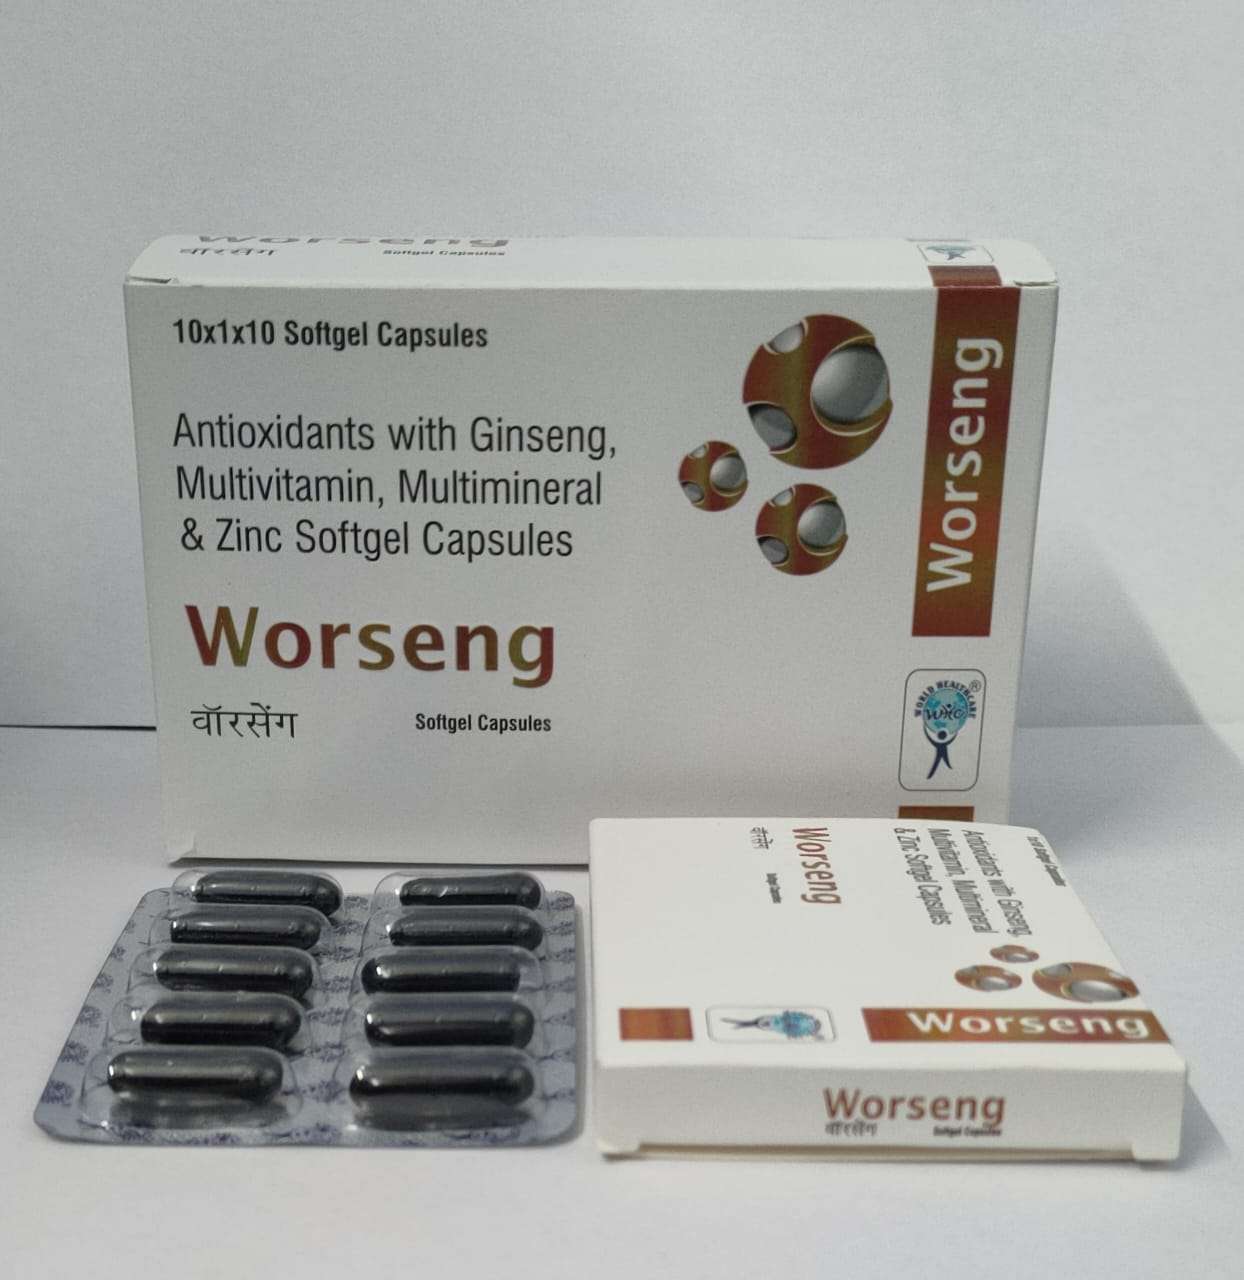 ginseng 42.5mg with multivitamins multiminerals and trace elements